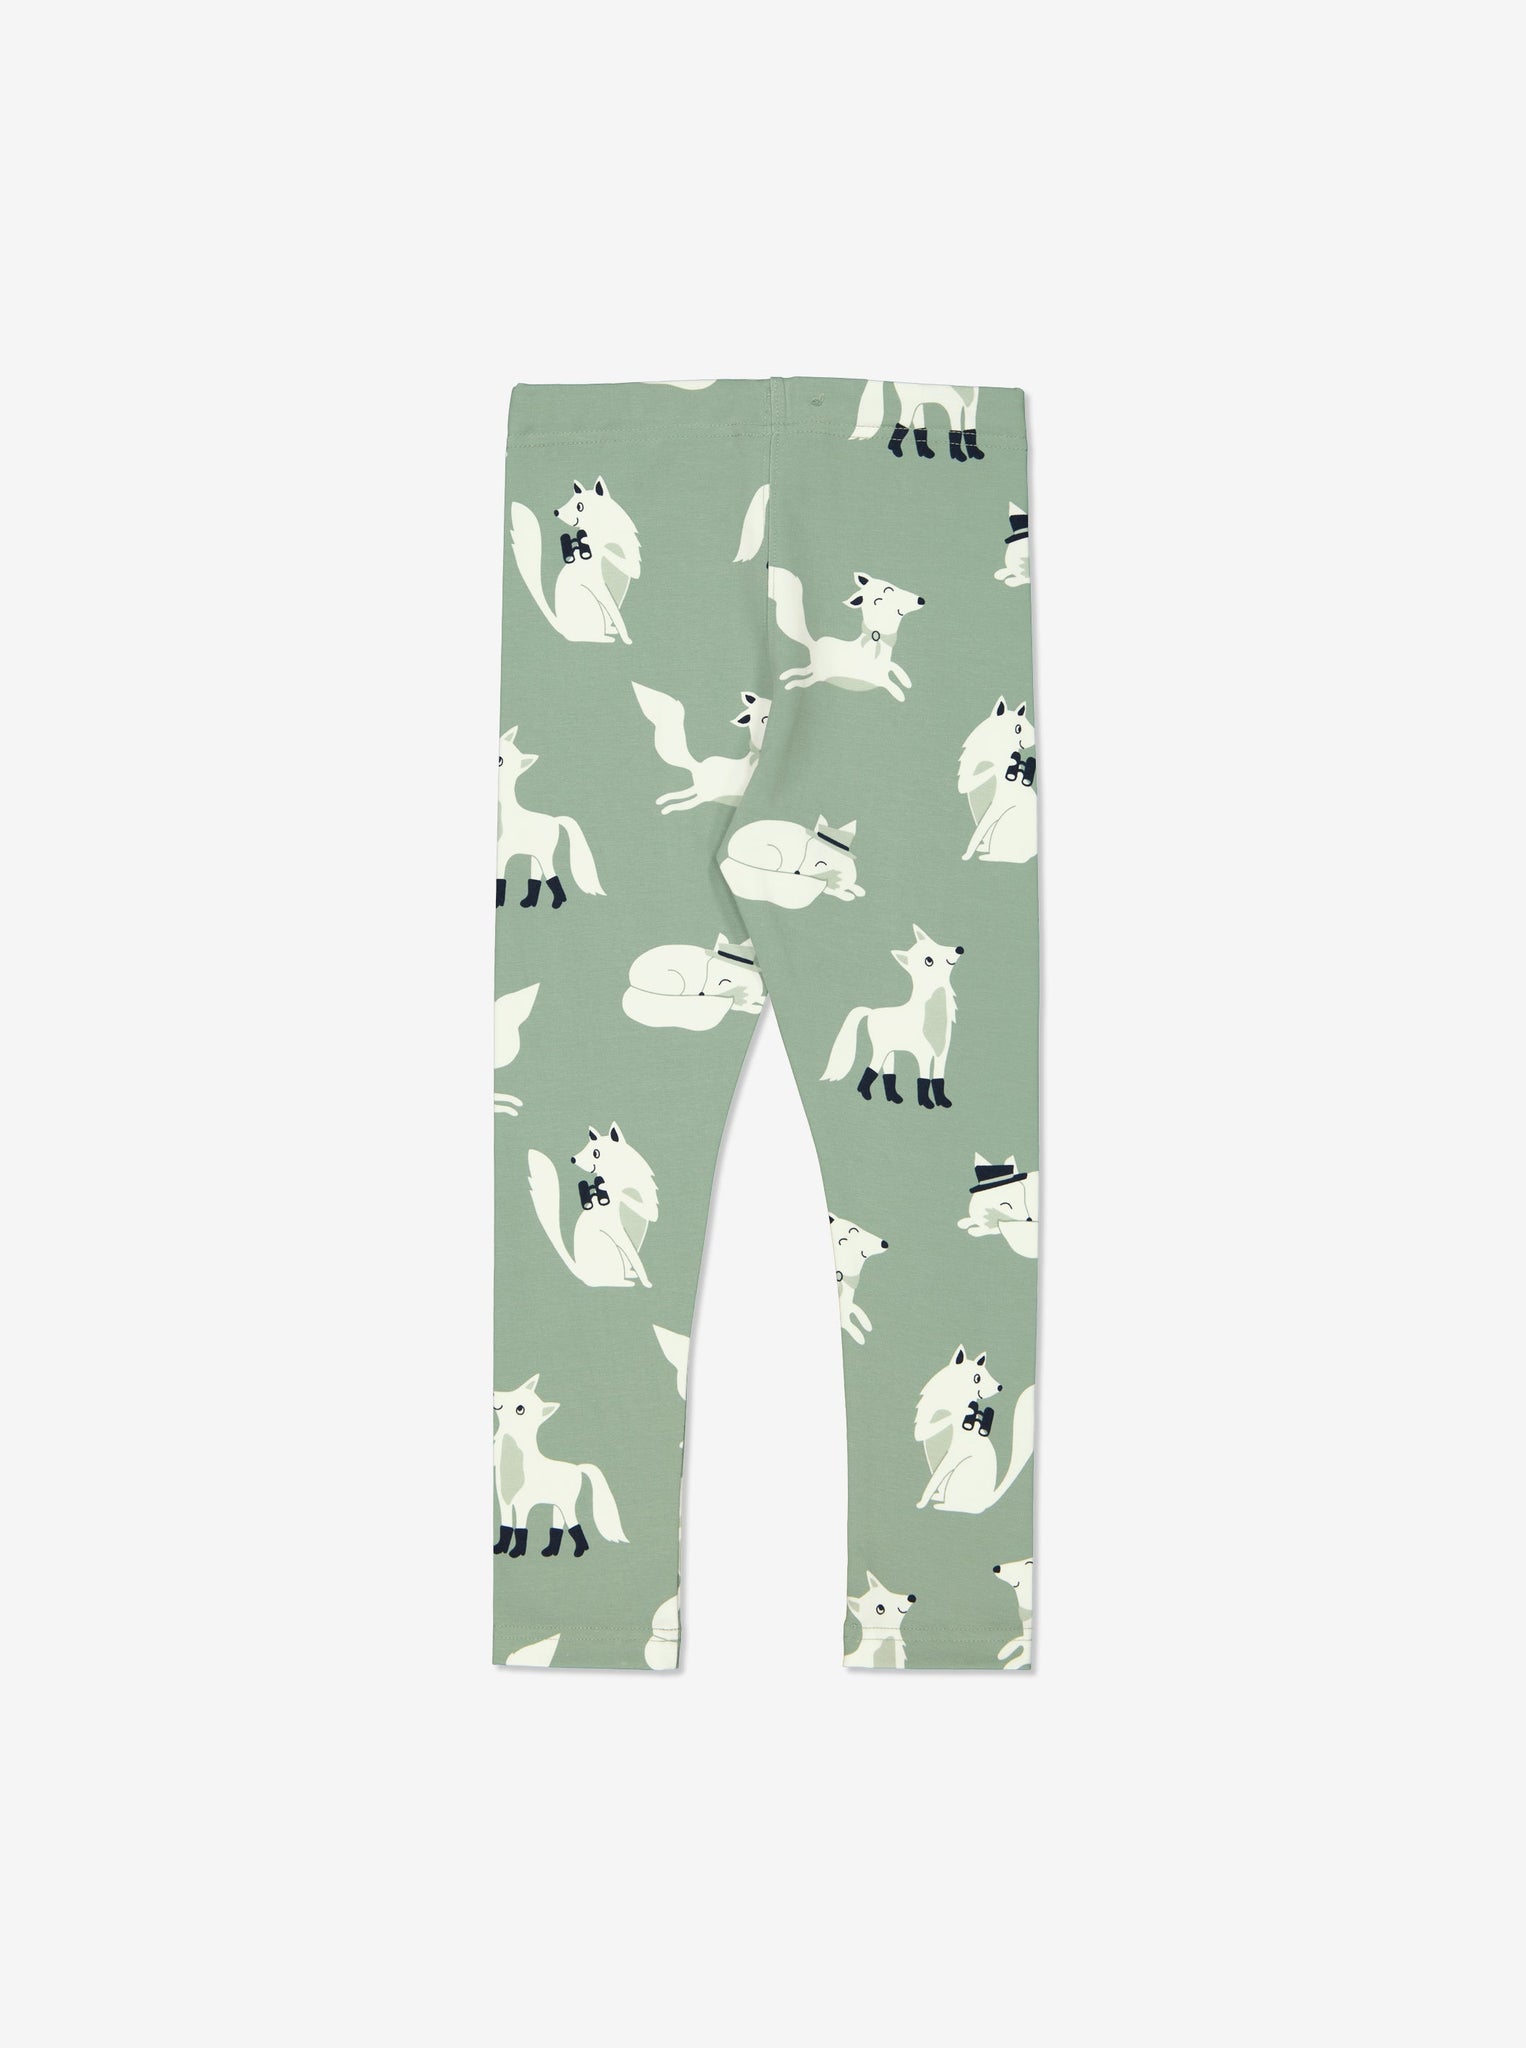  Wolf Print Kids Leggings from Polarn O. Pyret Kidswear. Made using ethically sourced materials.